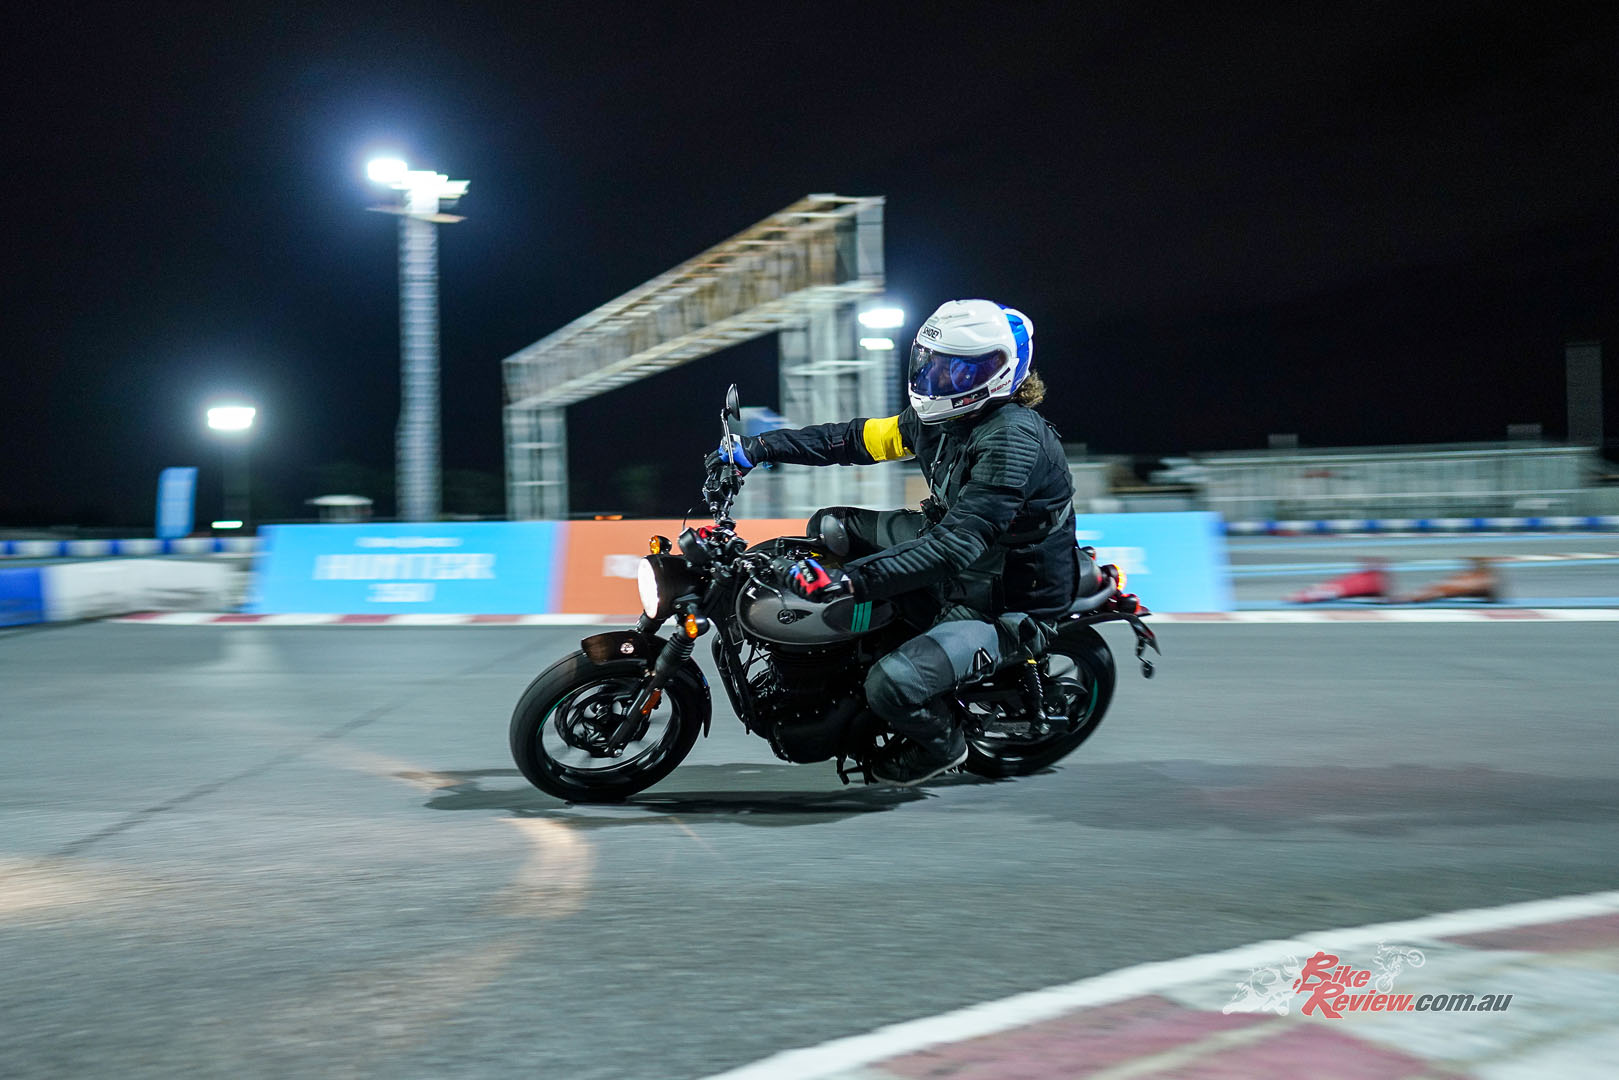 Royal Enfield had planned a 6-hour night ride. Yes, that’s right, 6-hours through the heart of Bangkok and out into the edges commencing at 9pm, followed by a track session at an outdoor go-kart track.